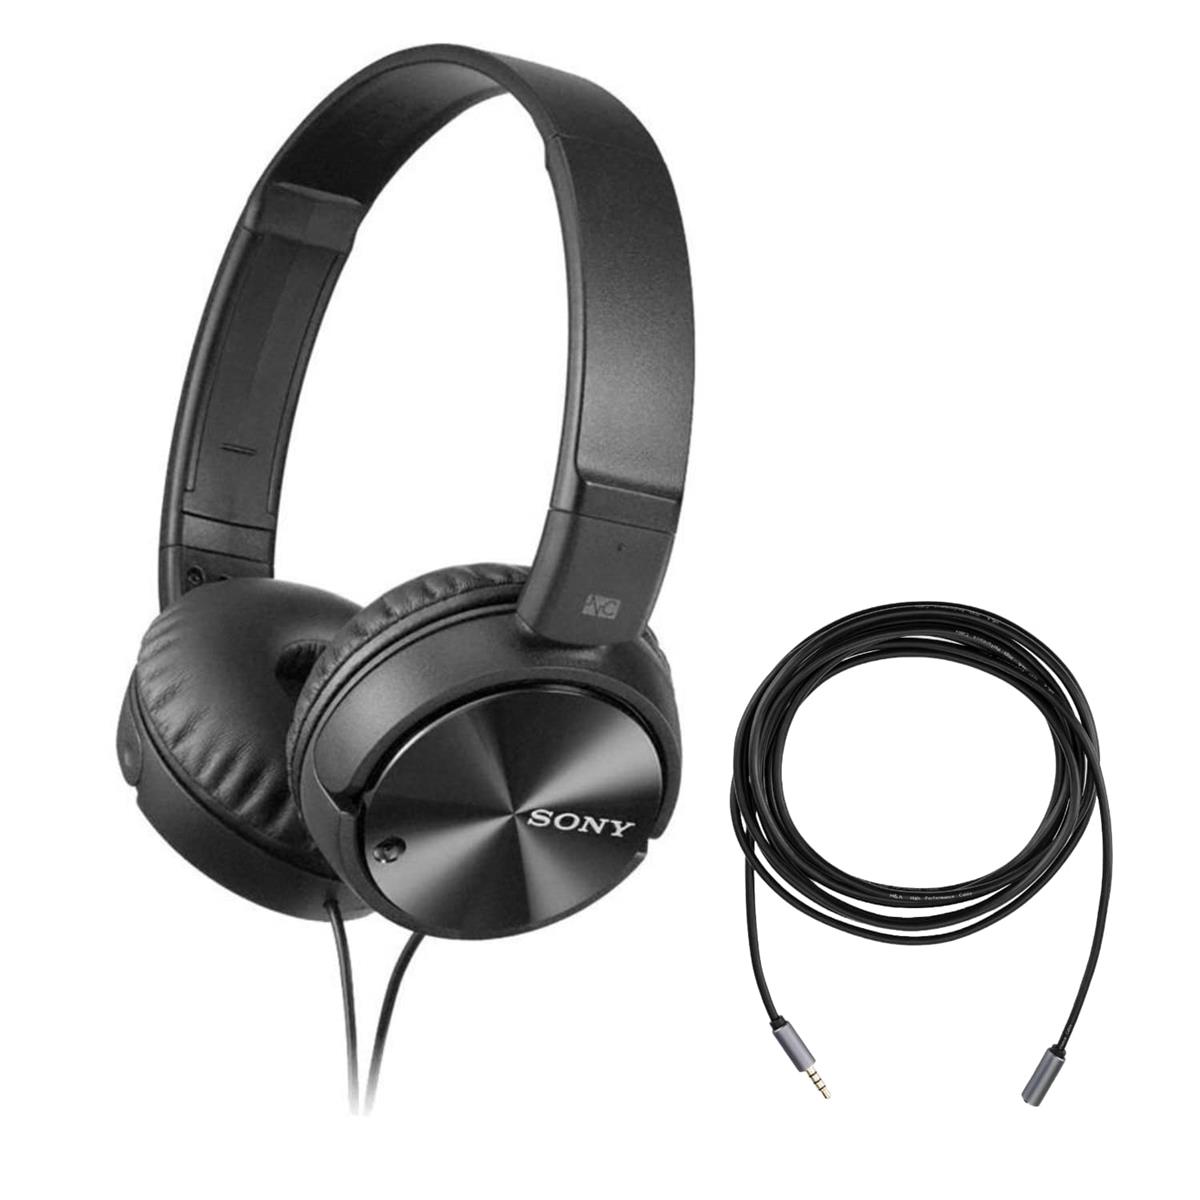 Image of Sony MDR-ZX110NC Noise Canceling Stereo Closed Dynamic Headphones with 10' Cable